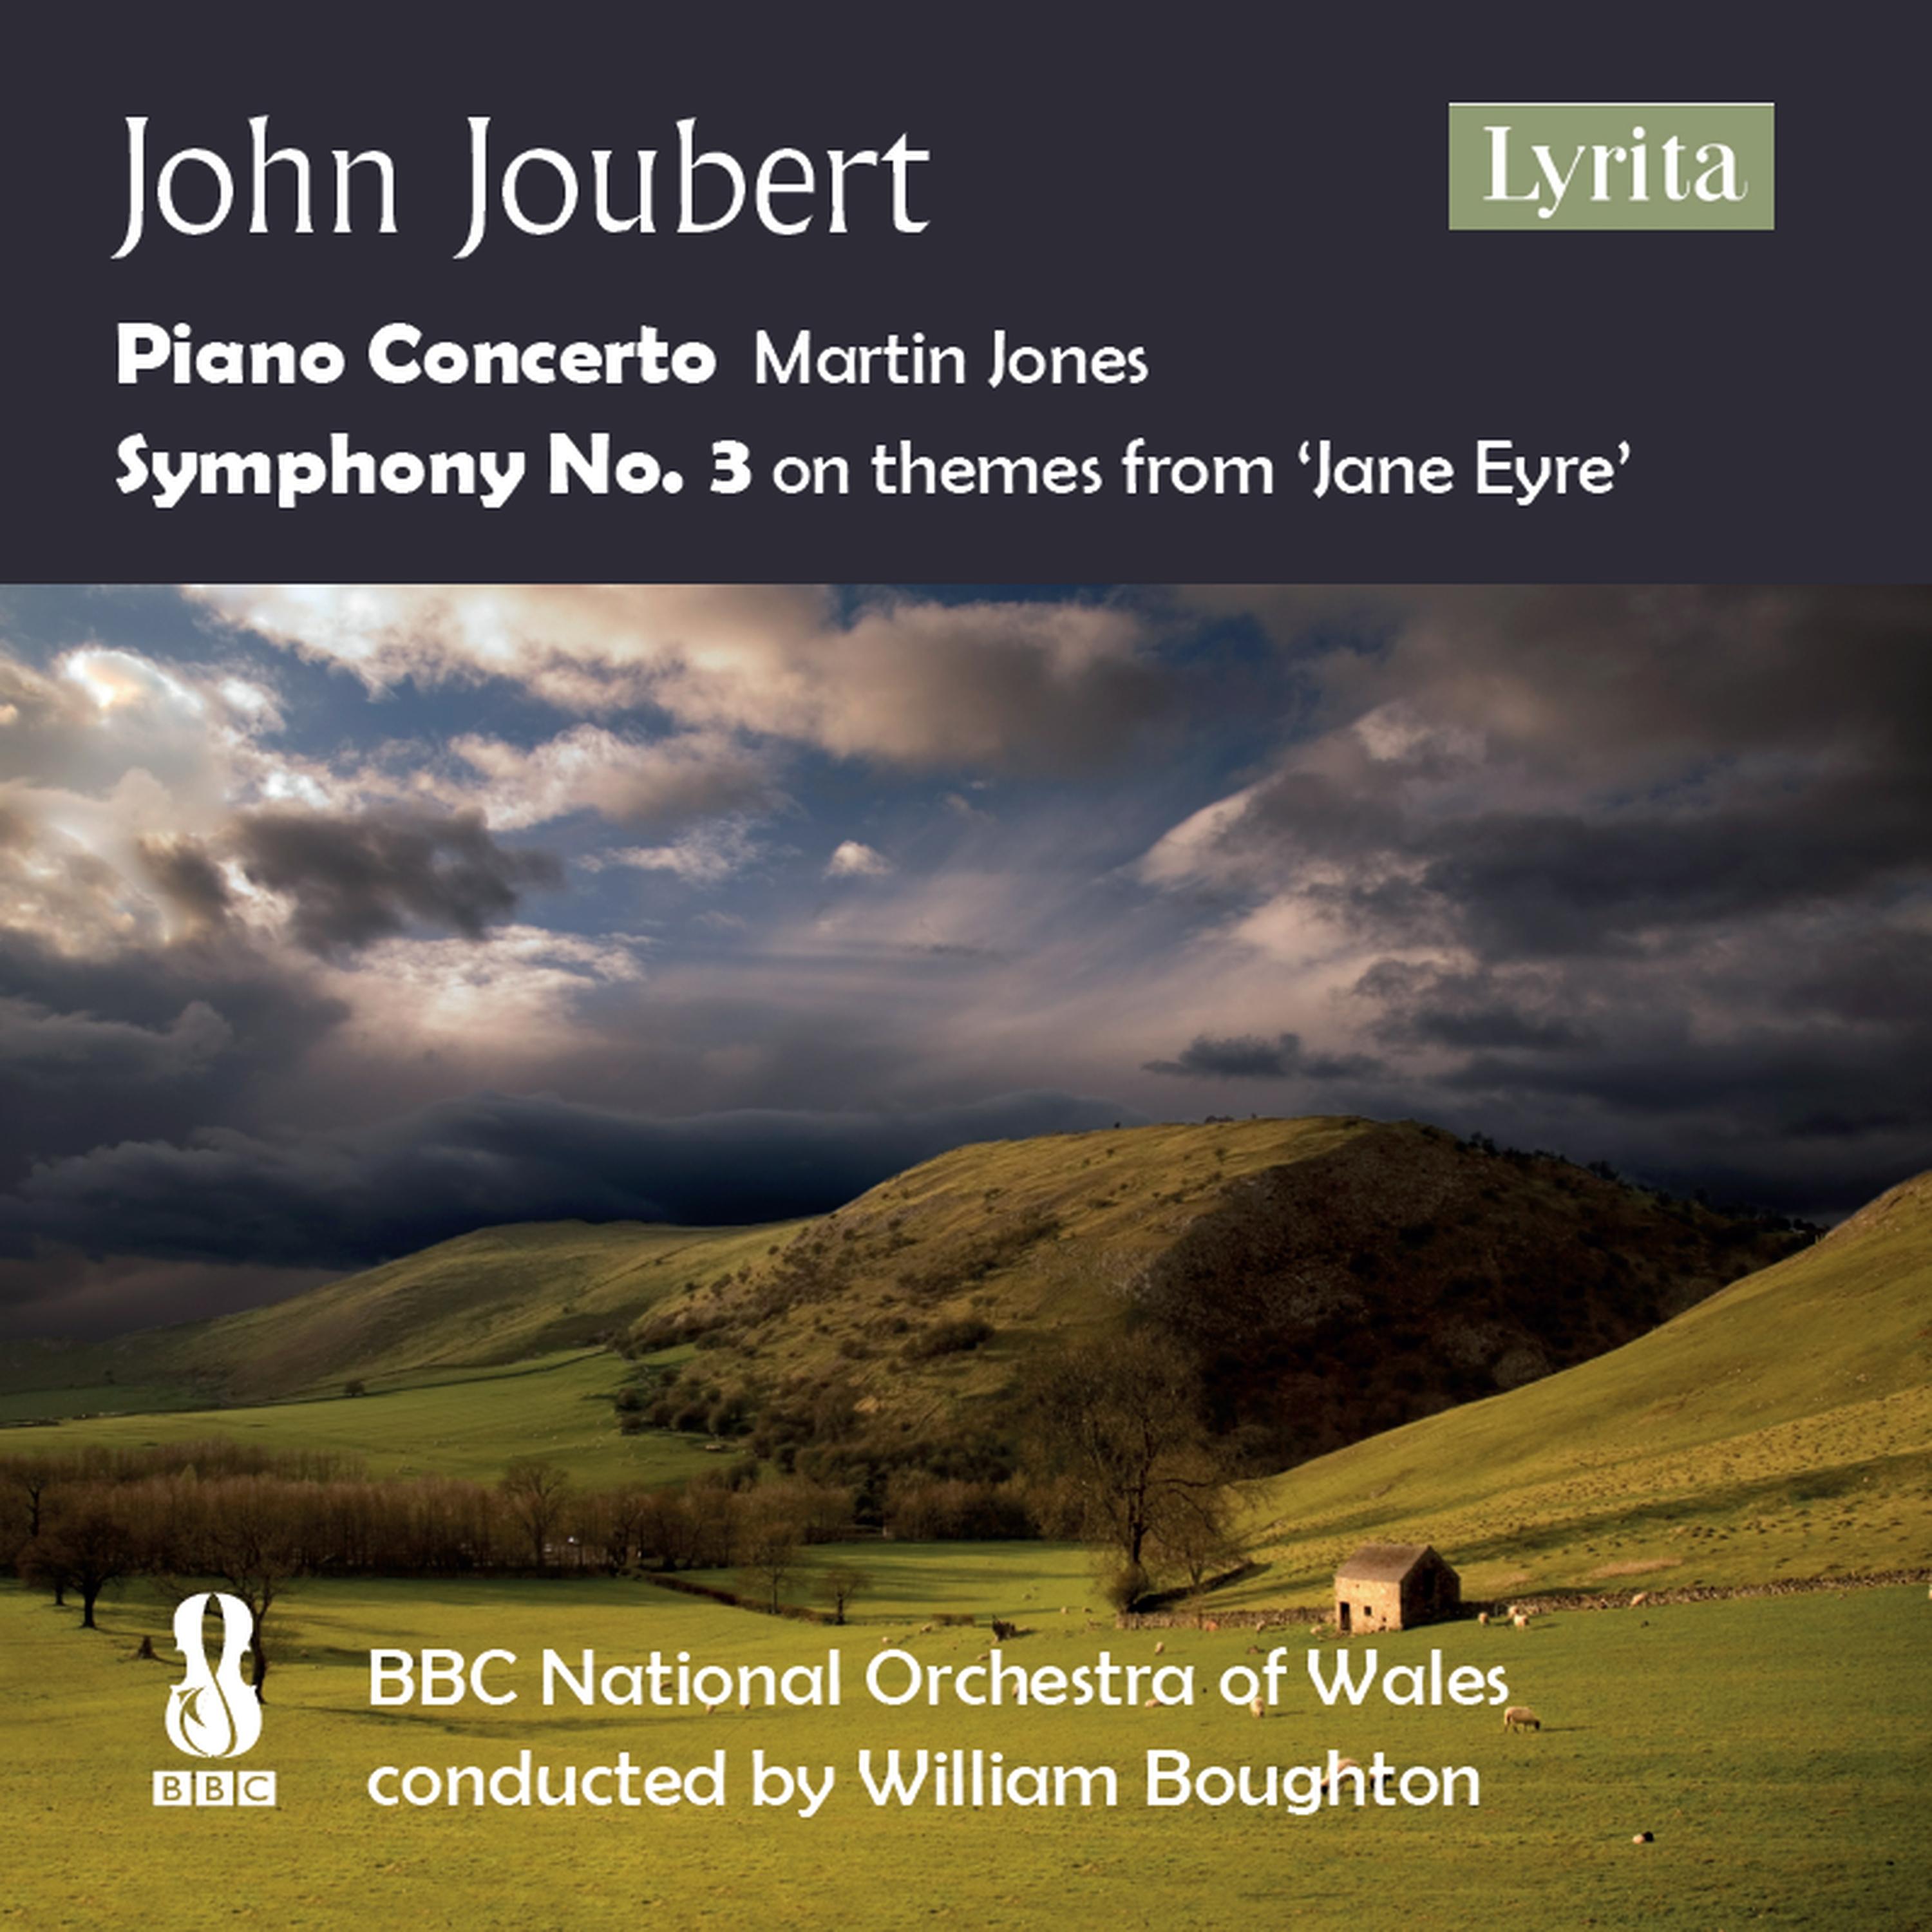 Symphony No. 3, Op. 178 on themes from the opera Jane Eyre: IV. Whitecross Rectory - Lento Allegro